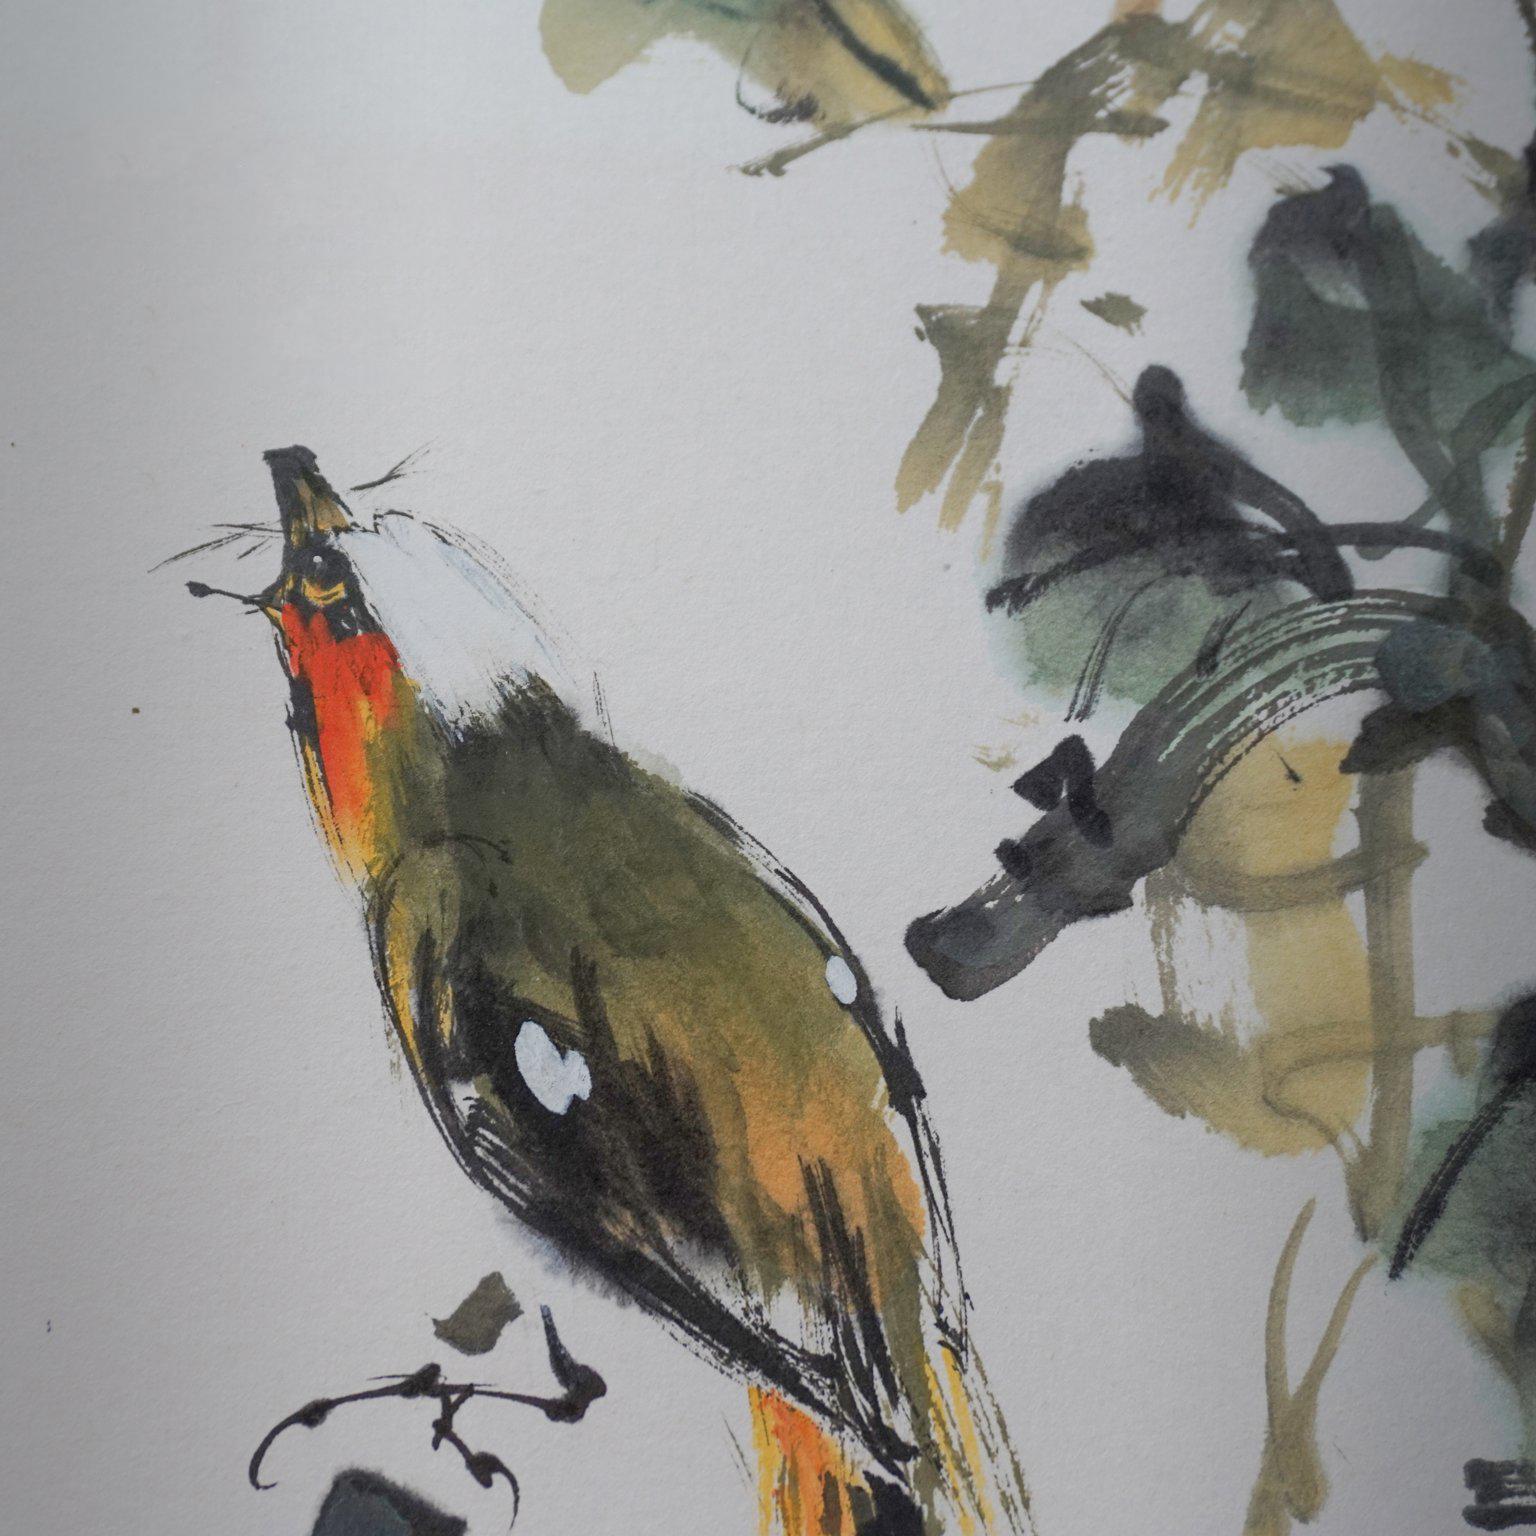 Hong Kong Framed Chinese Watercolor Painting 'Bird on Flower' by Zhao Shao Ang in 1987 For Sale